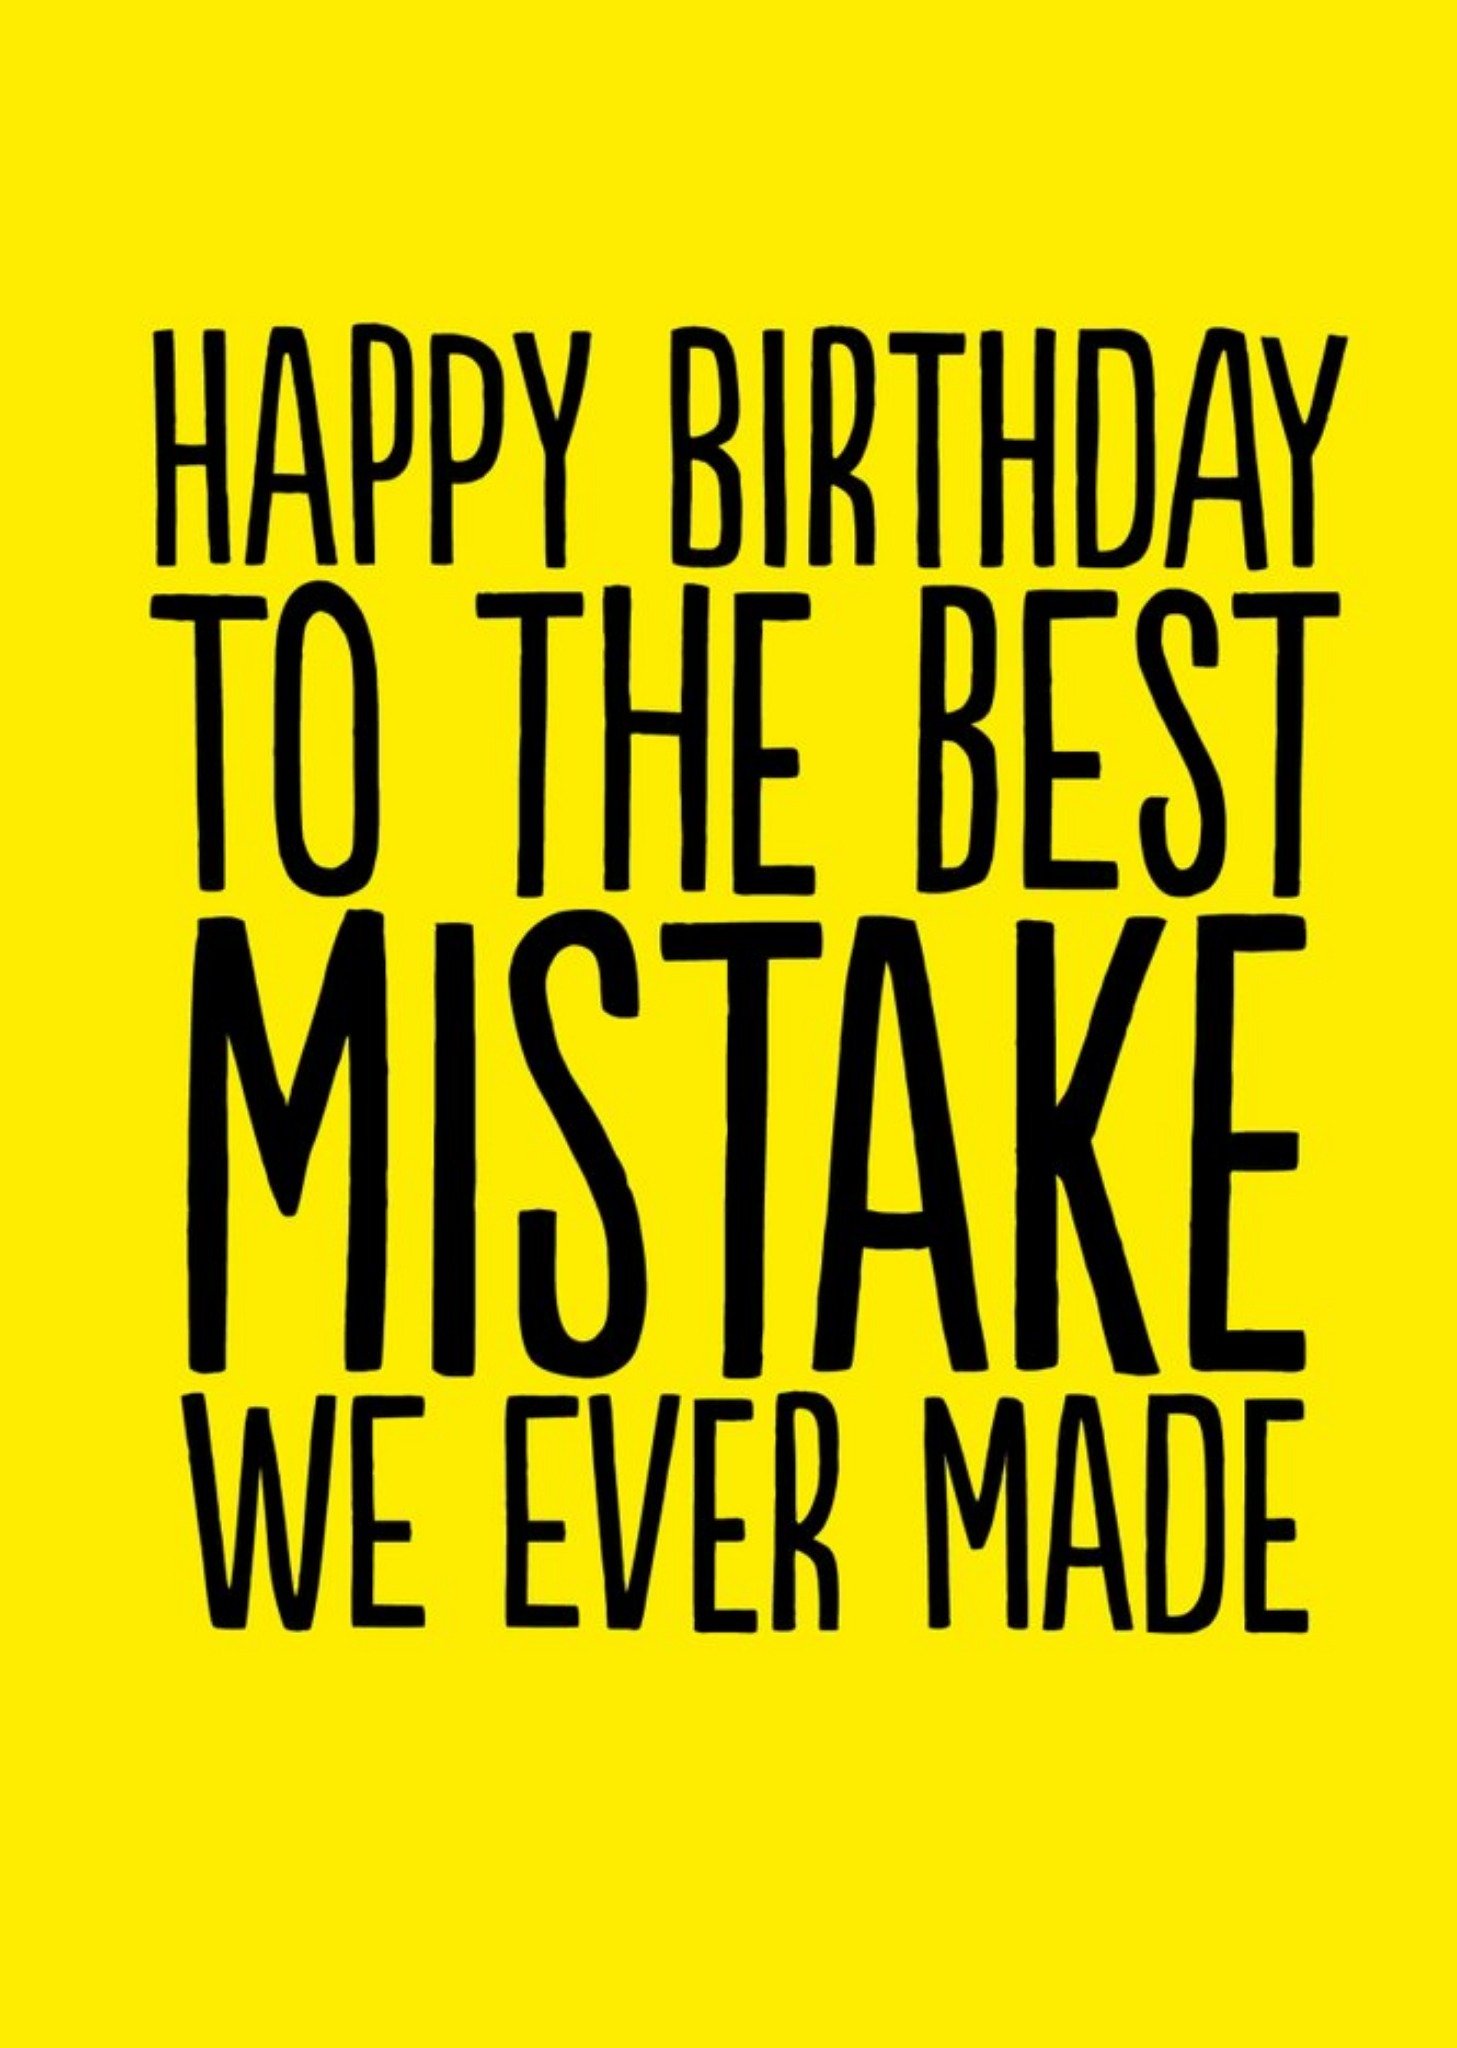 Moonpig Funny Happy Birthday To The Best Mistake We Ever Made Card Ecard